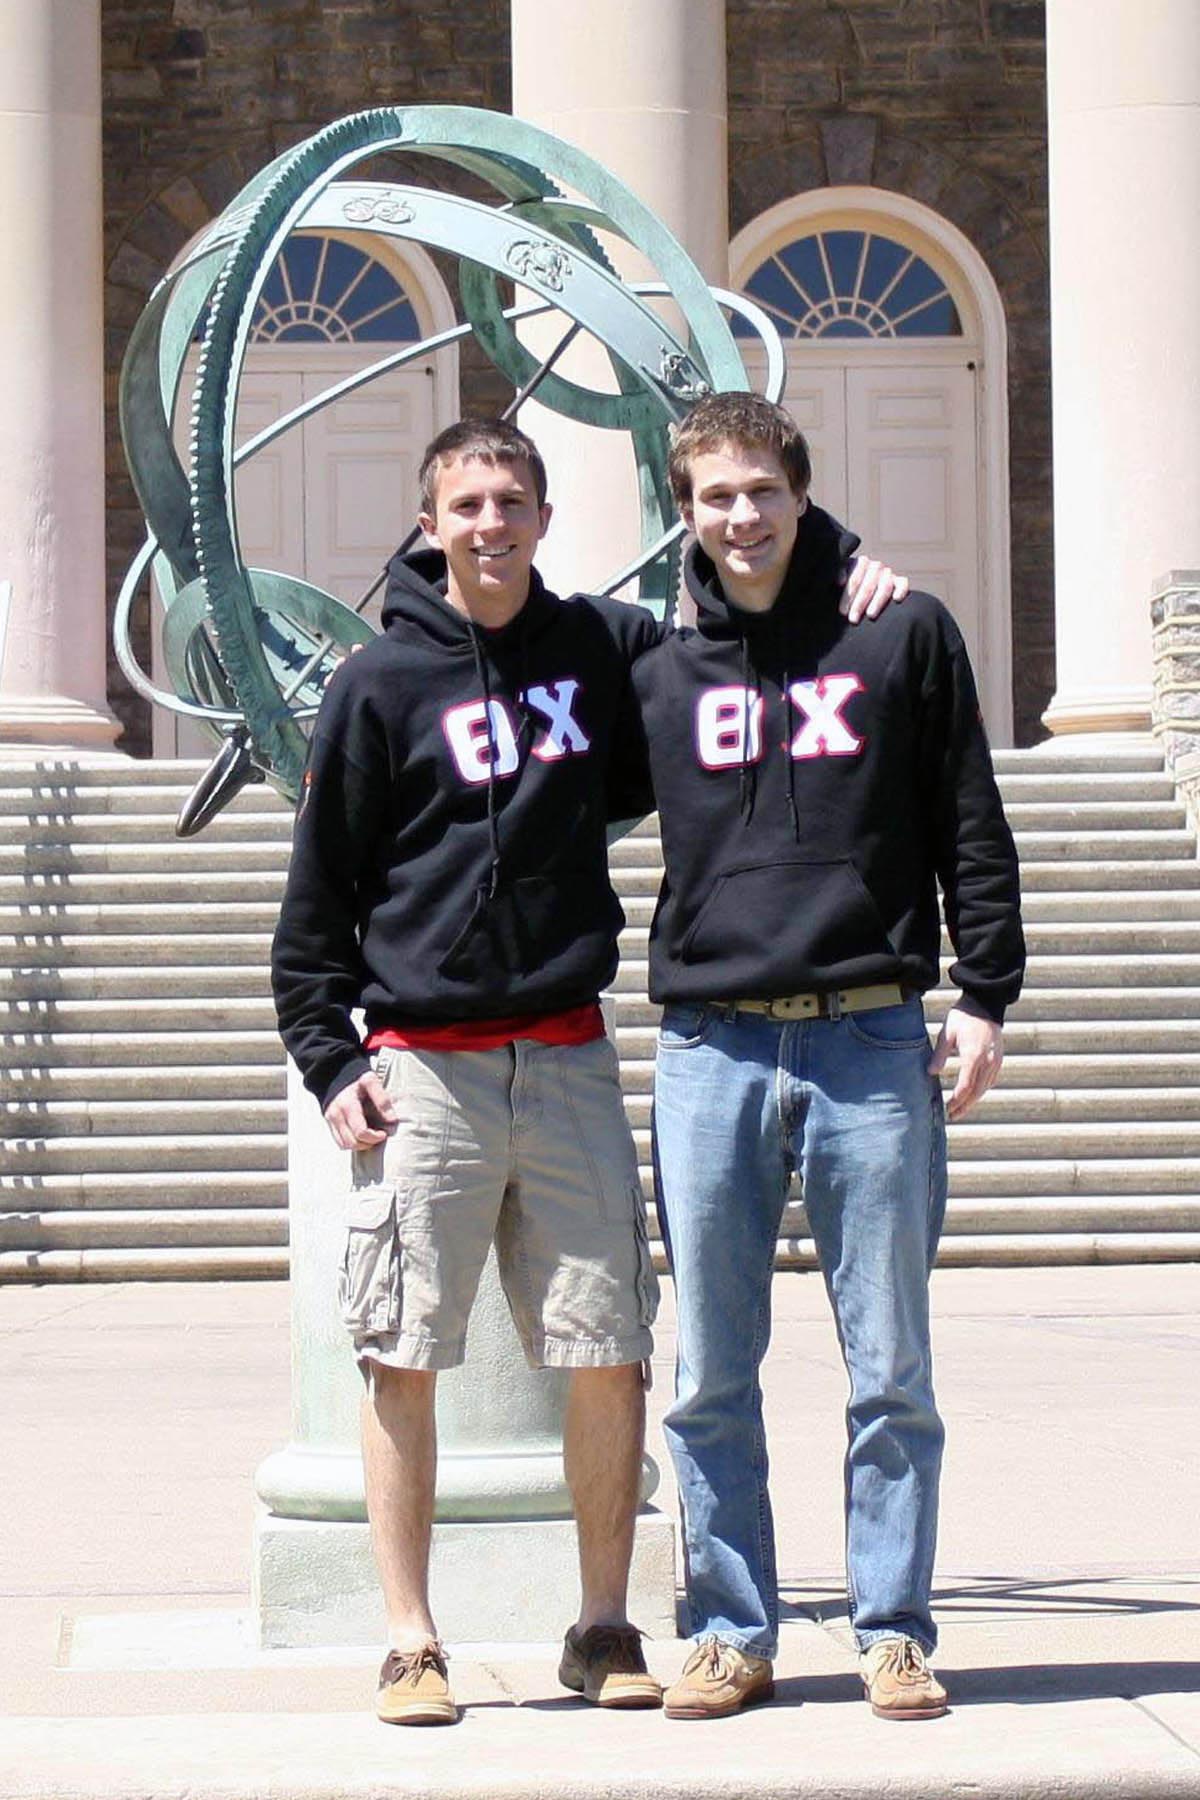  L to R: Mark Moseley and Robert Aichele
2012 End of Spring Semester 